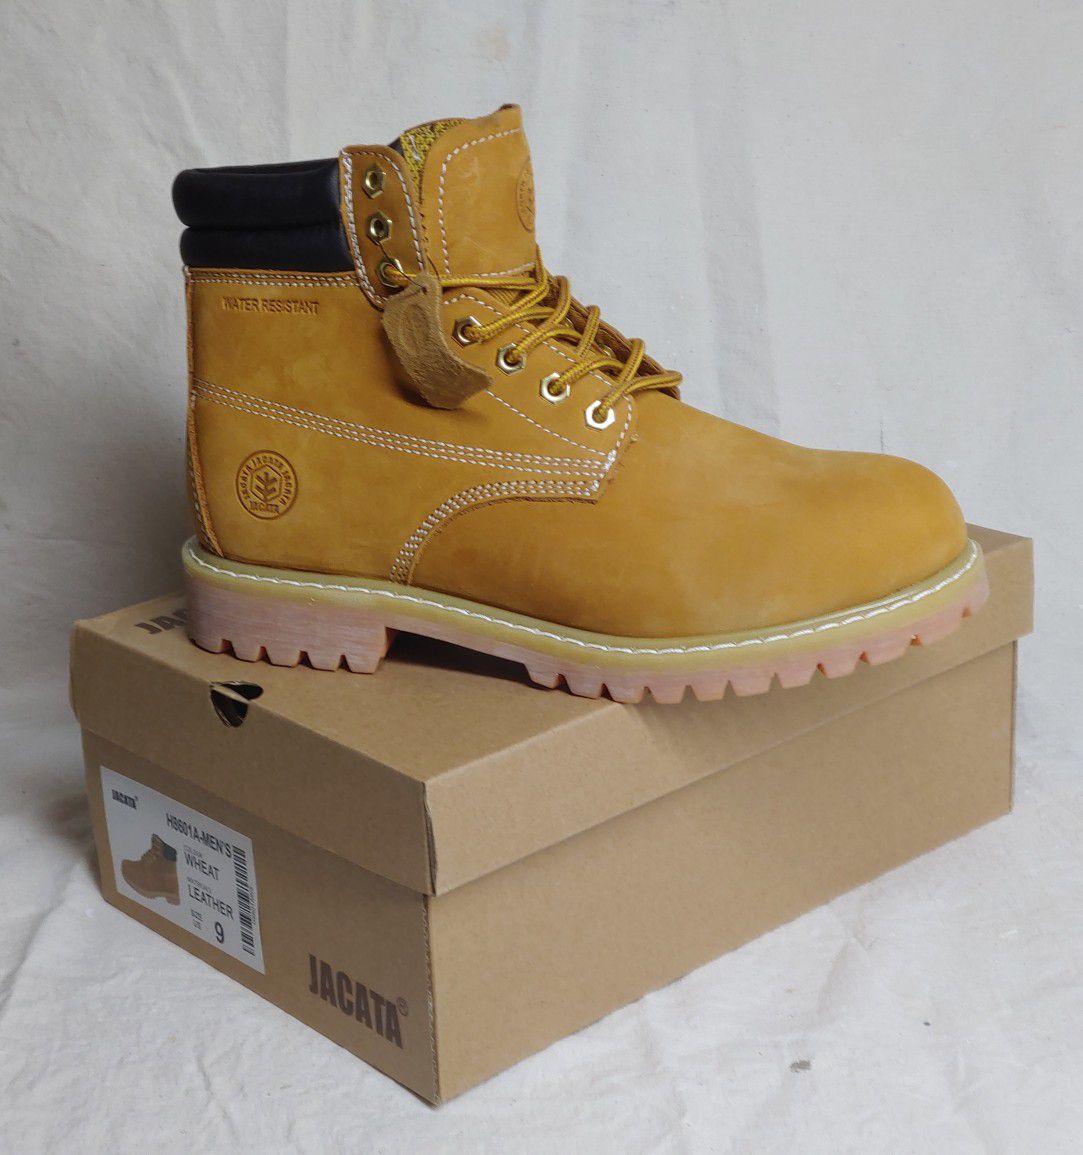 New in box work boots